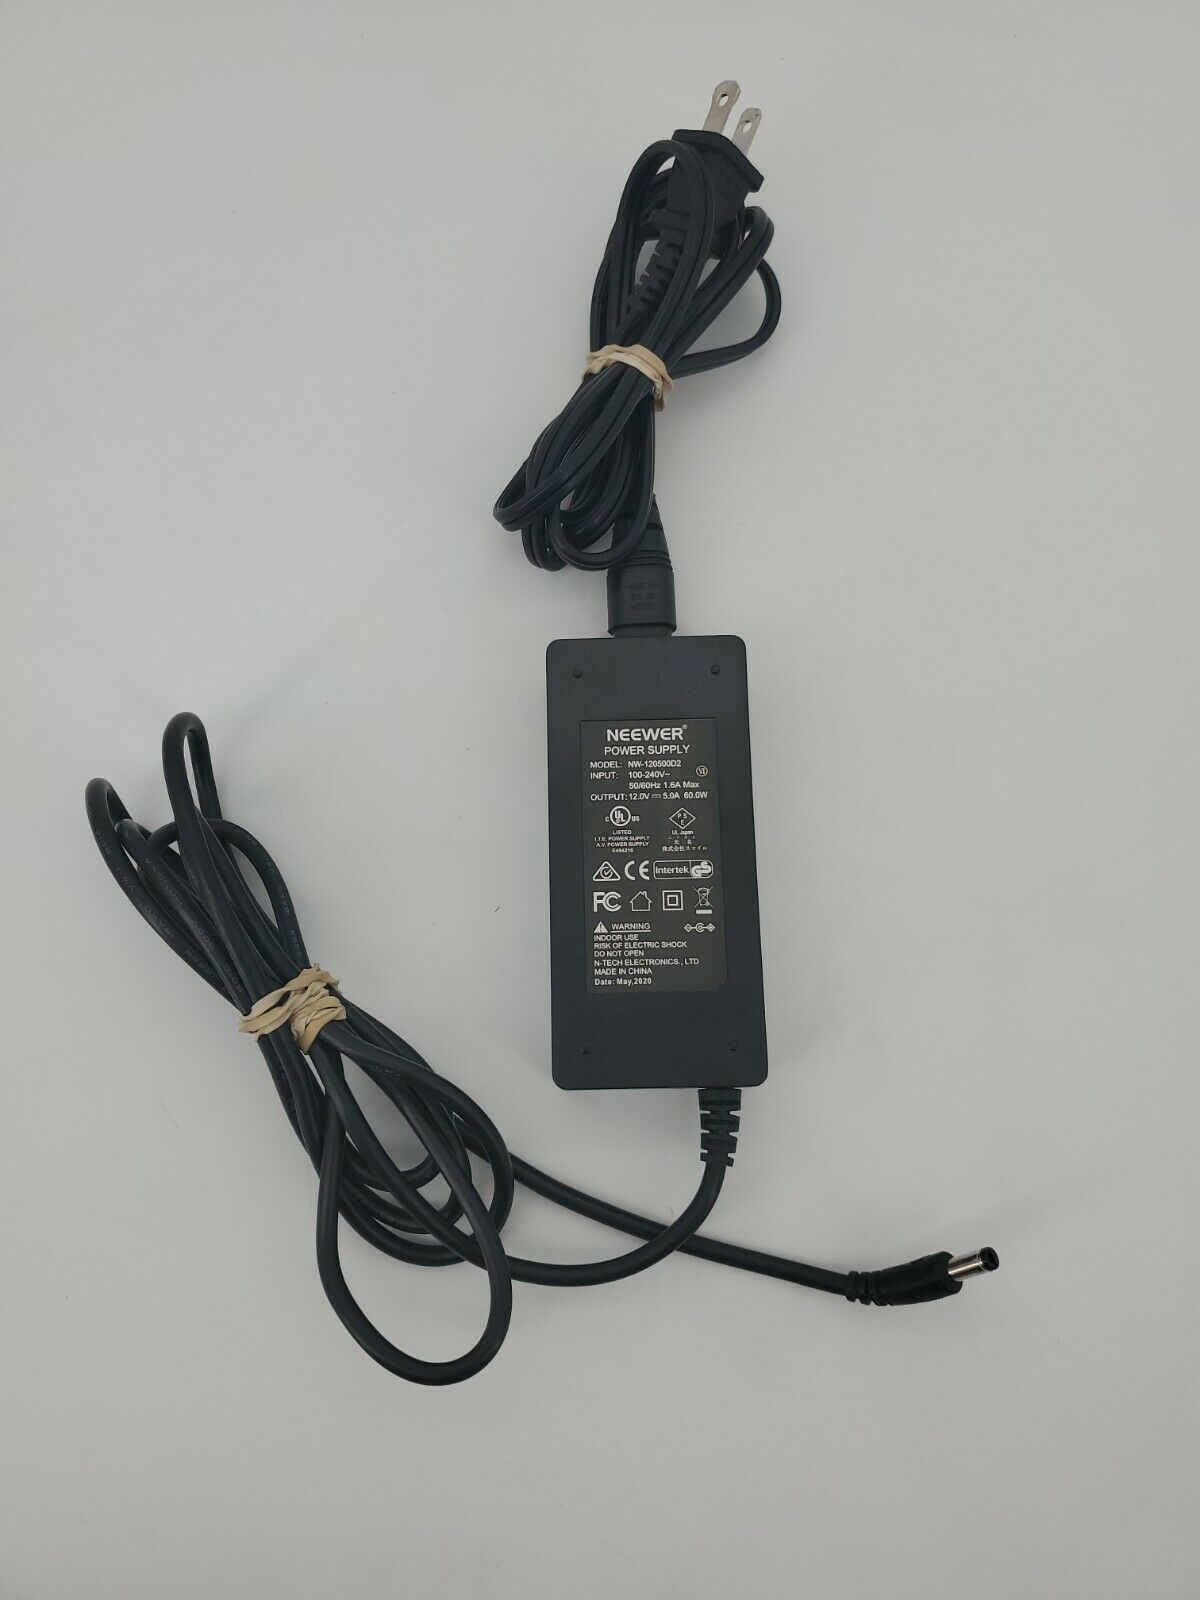 Neewer Power Adapter Model NW-1205500D2 Indoor Use Type: Adapter Features: new Brand: Neewer ewer Power Adapter Mo